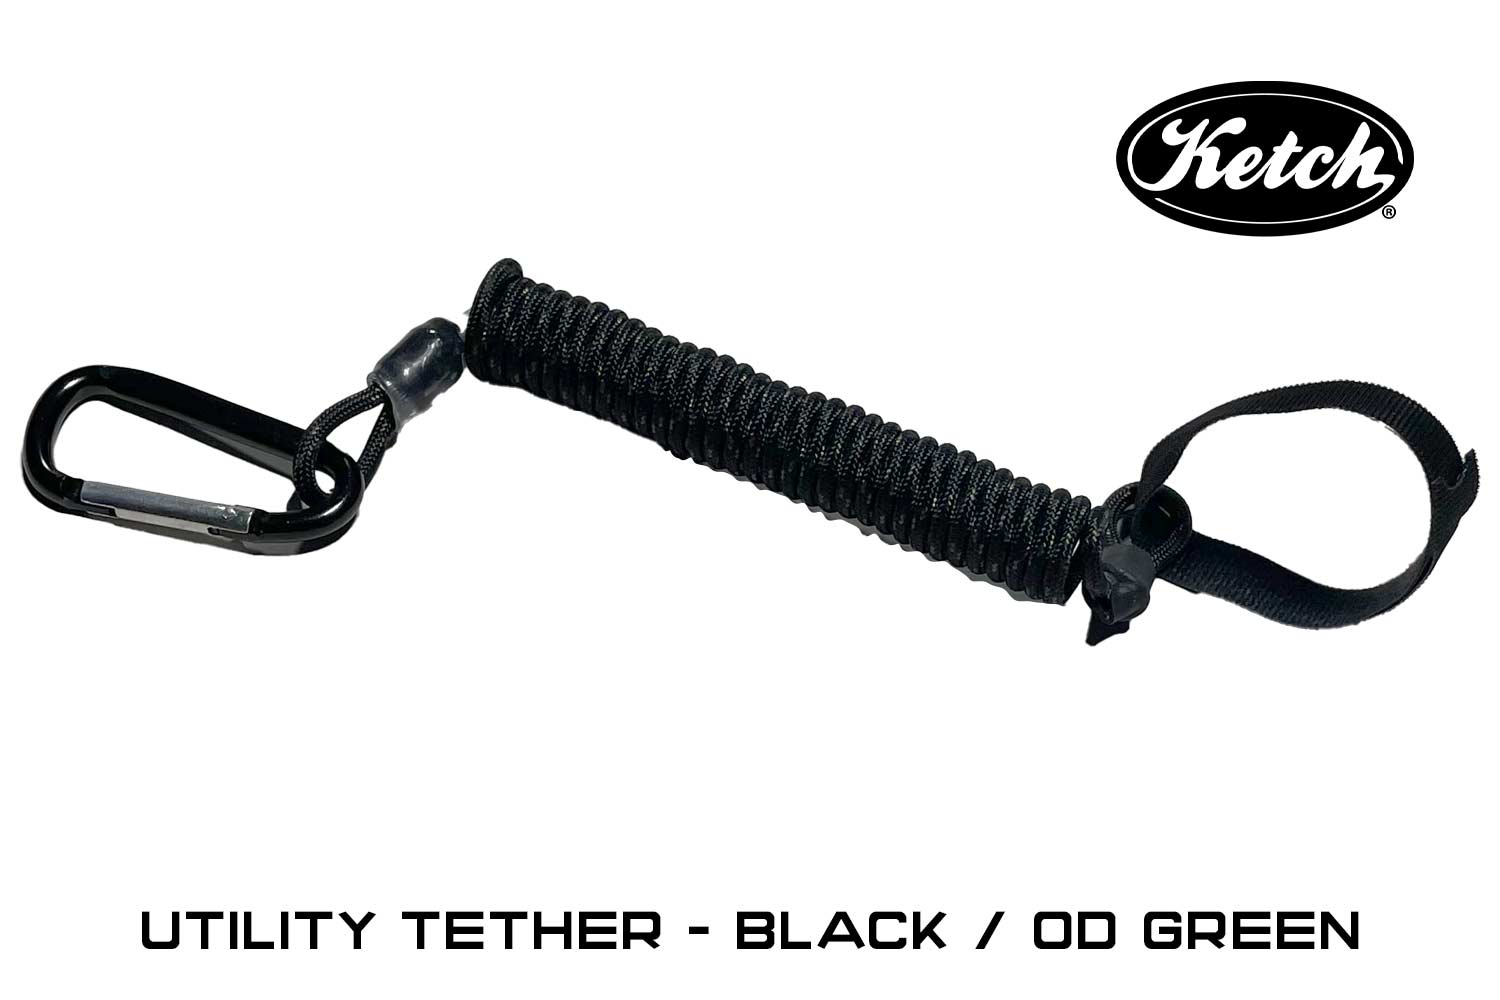 Black / OD Green Ketch Utility Tether for securing items to your PFD or kayak.